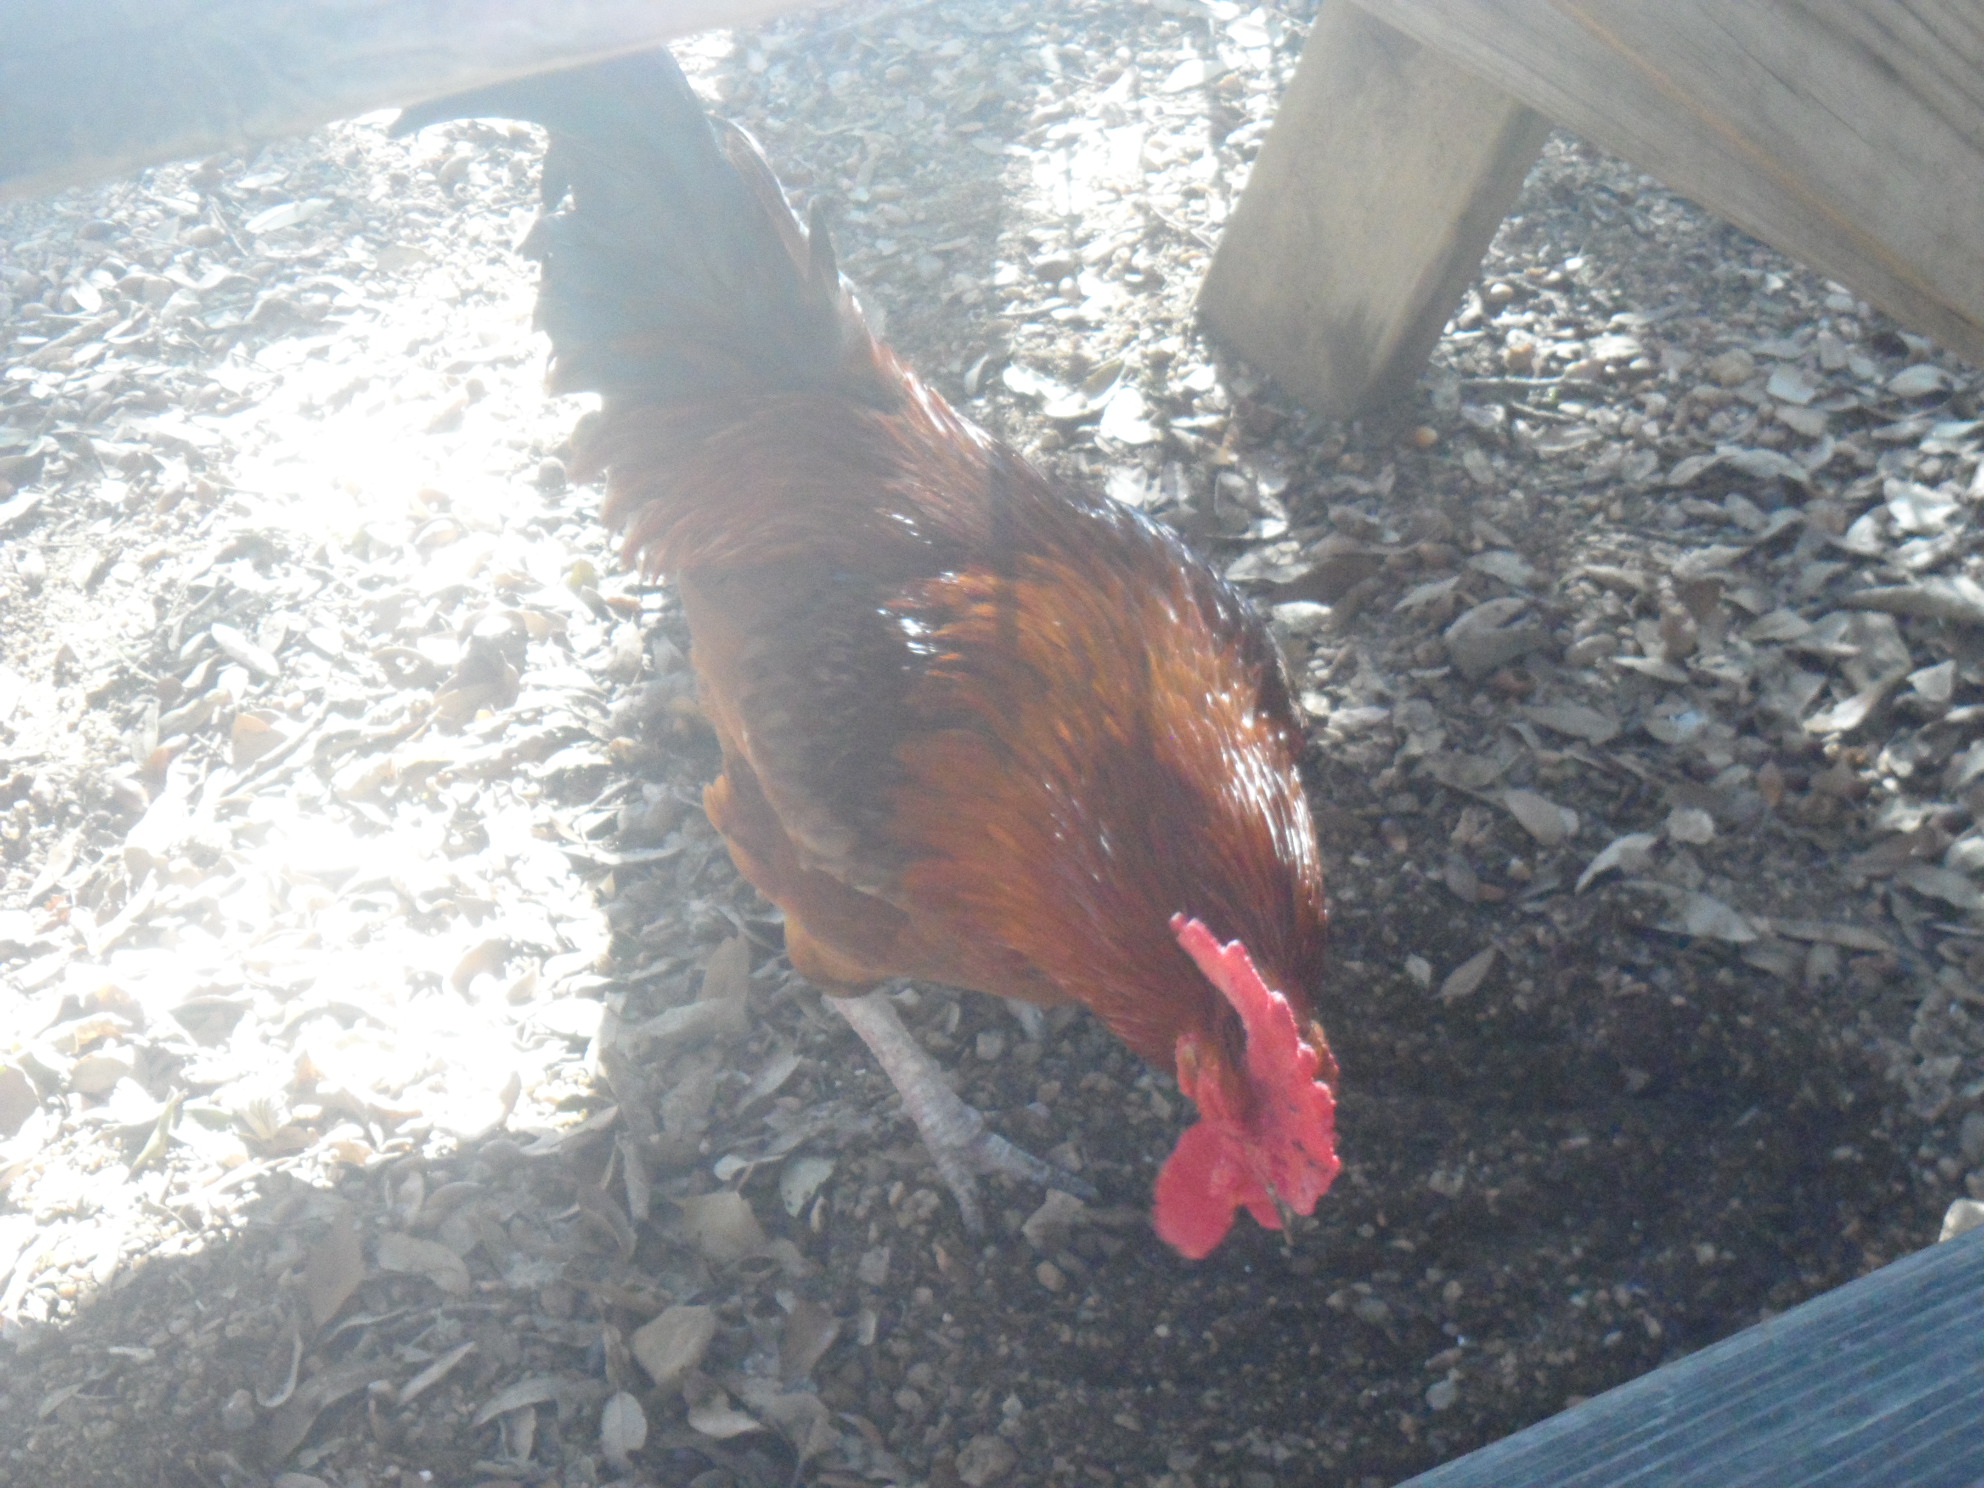 The rooster under our table.